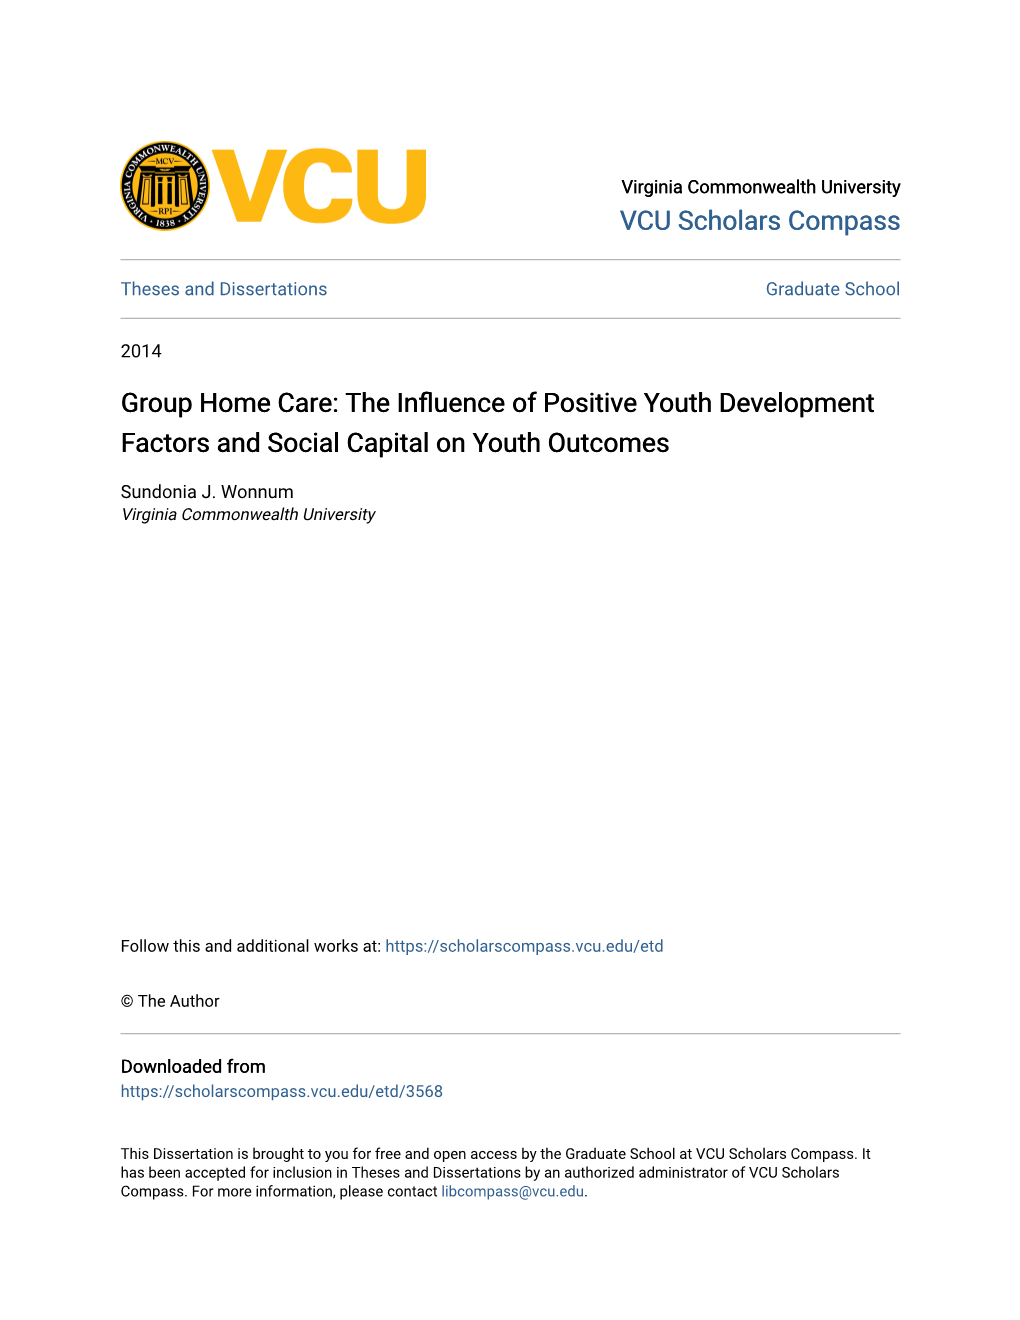 Group Home Care: the Influence of Positive Youth Development Factors and Social Capital on Youth Outcomes